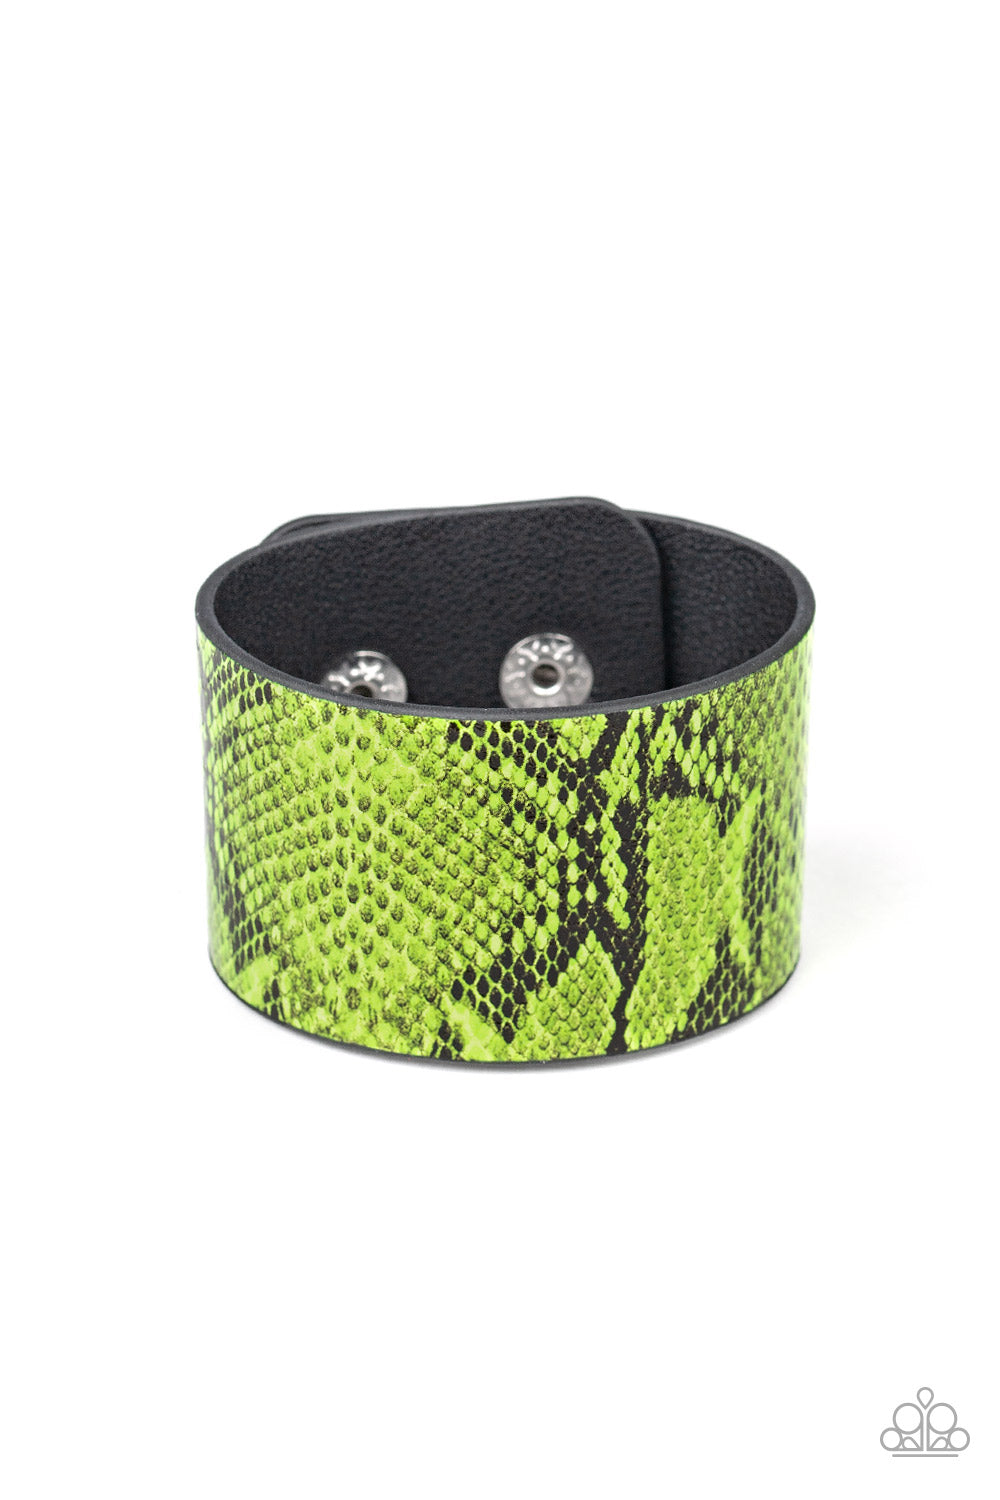 Item #P9SE-URGR-146XX Featuring neon green python print, a thick leather band wraps around the wrist for a colorfully wild look. Features an adjustable snap closure.  Sold as one individual bracelet.